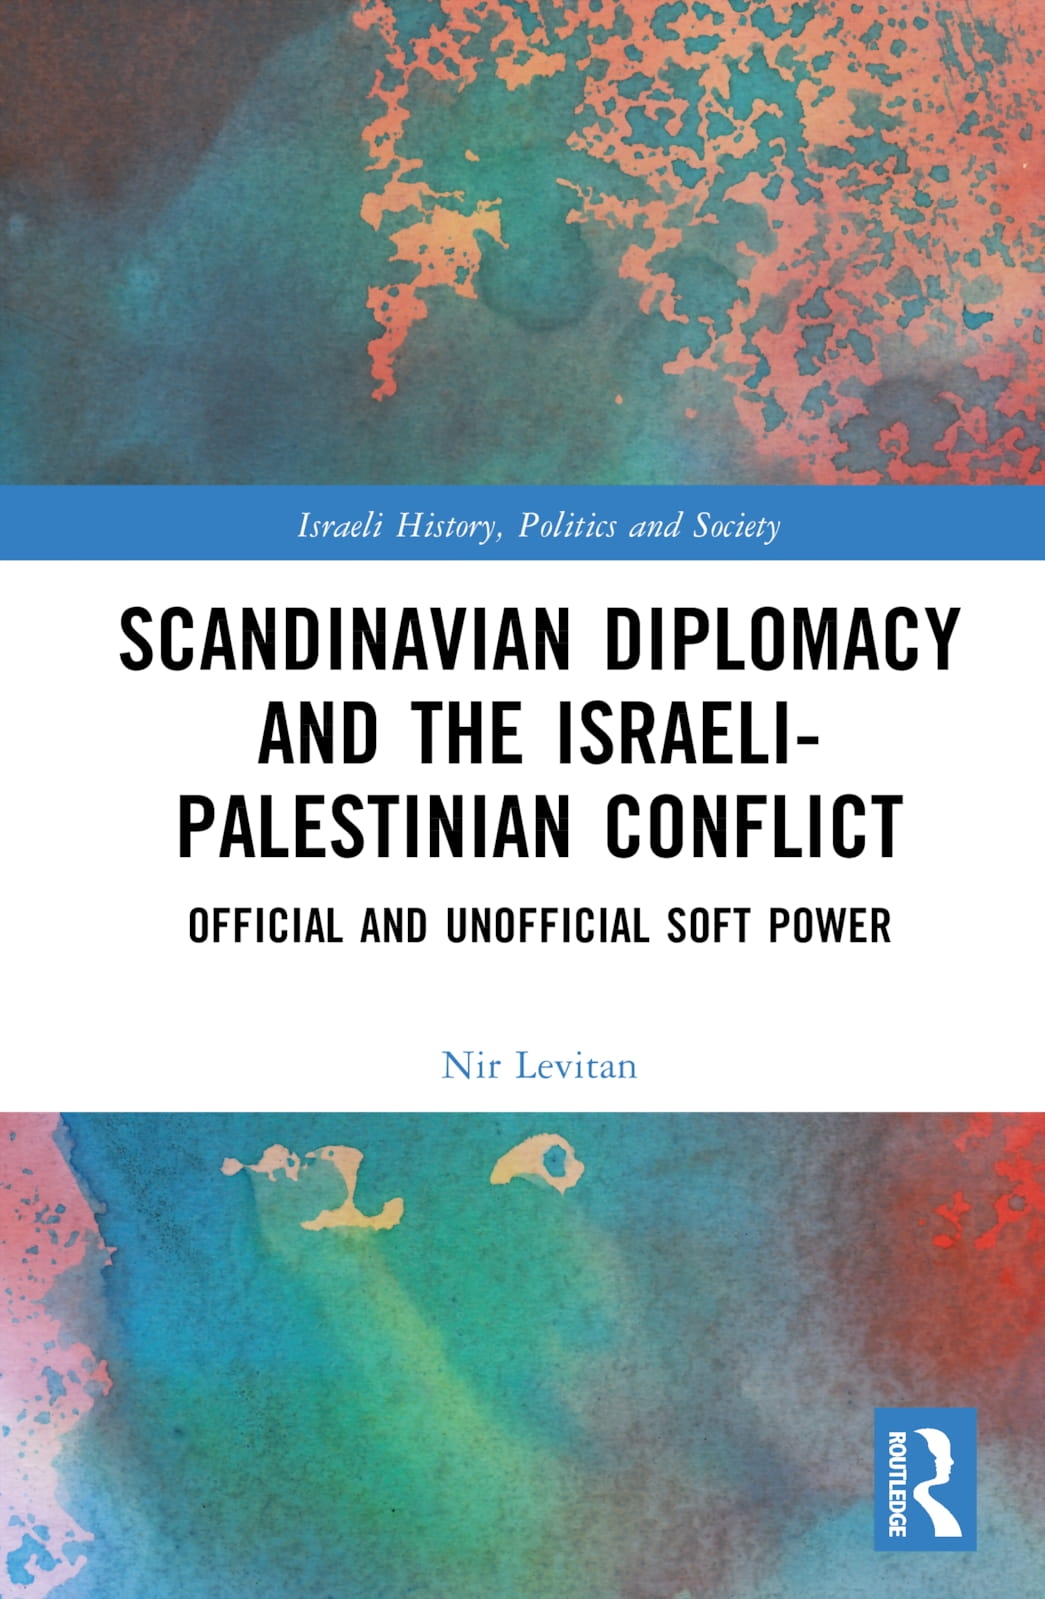 Scandinavian Diplomacy and the Israeli-Palestinian Conflict: Official and Unofficial Soft Power